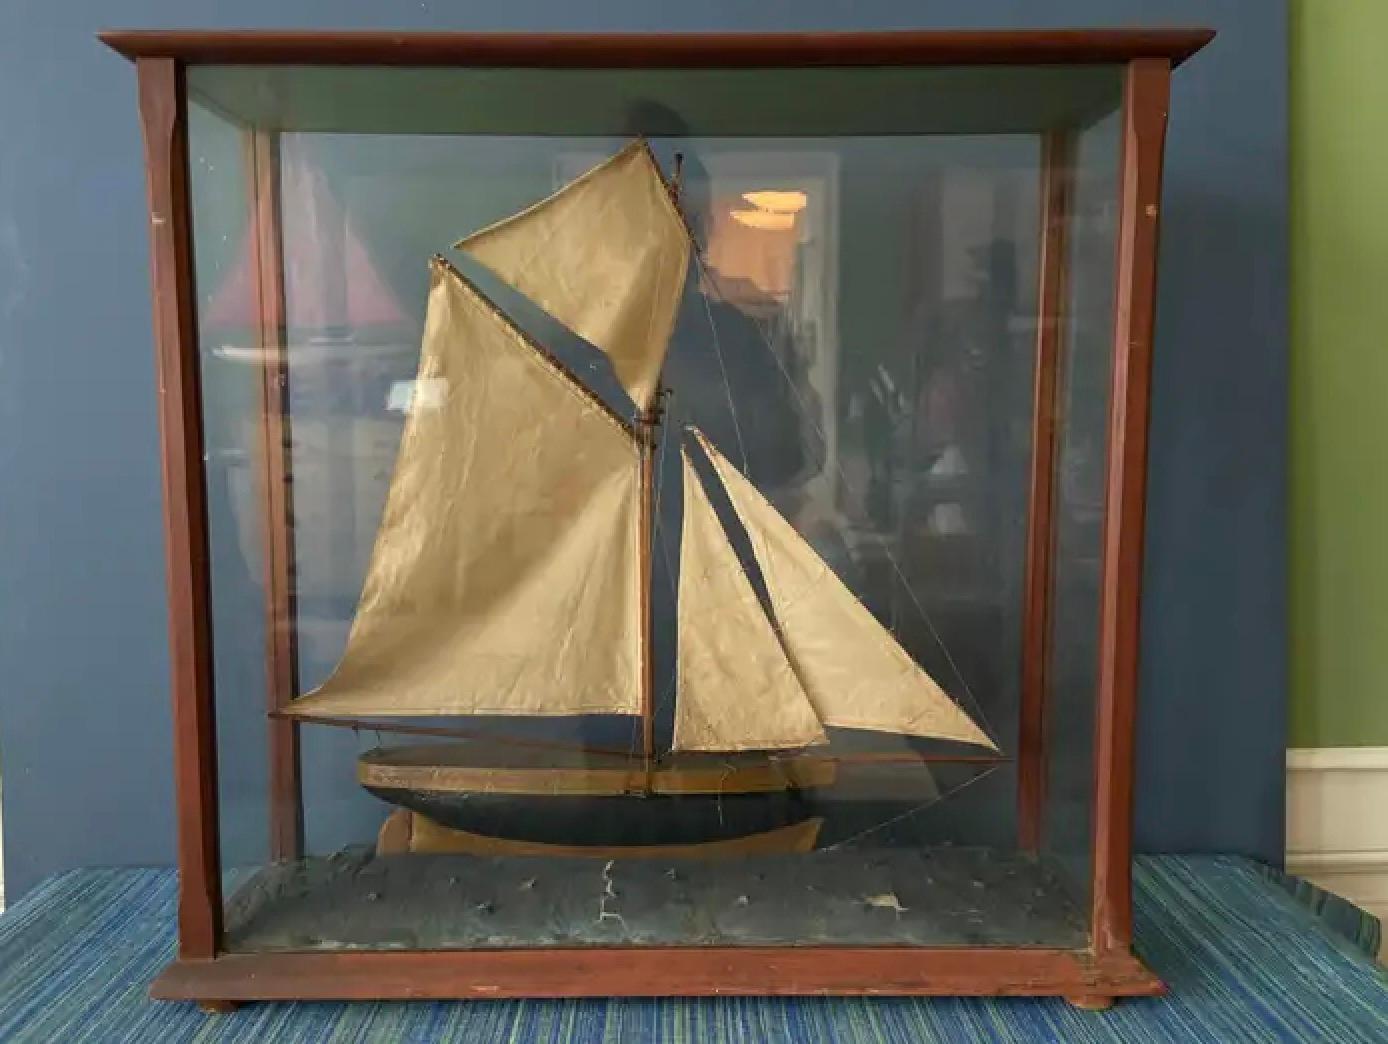 Glass Antique Diorama of a Sailing Ship in Wooden Frame, France, 19th Century